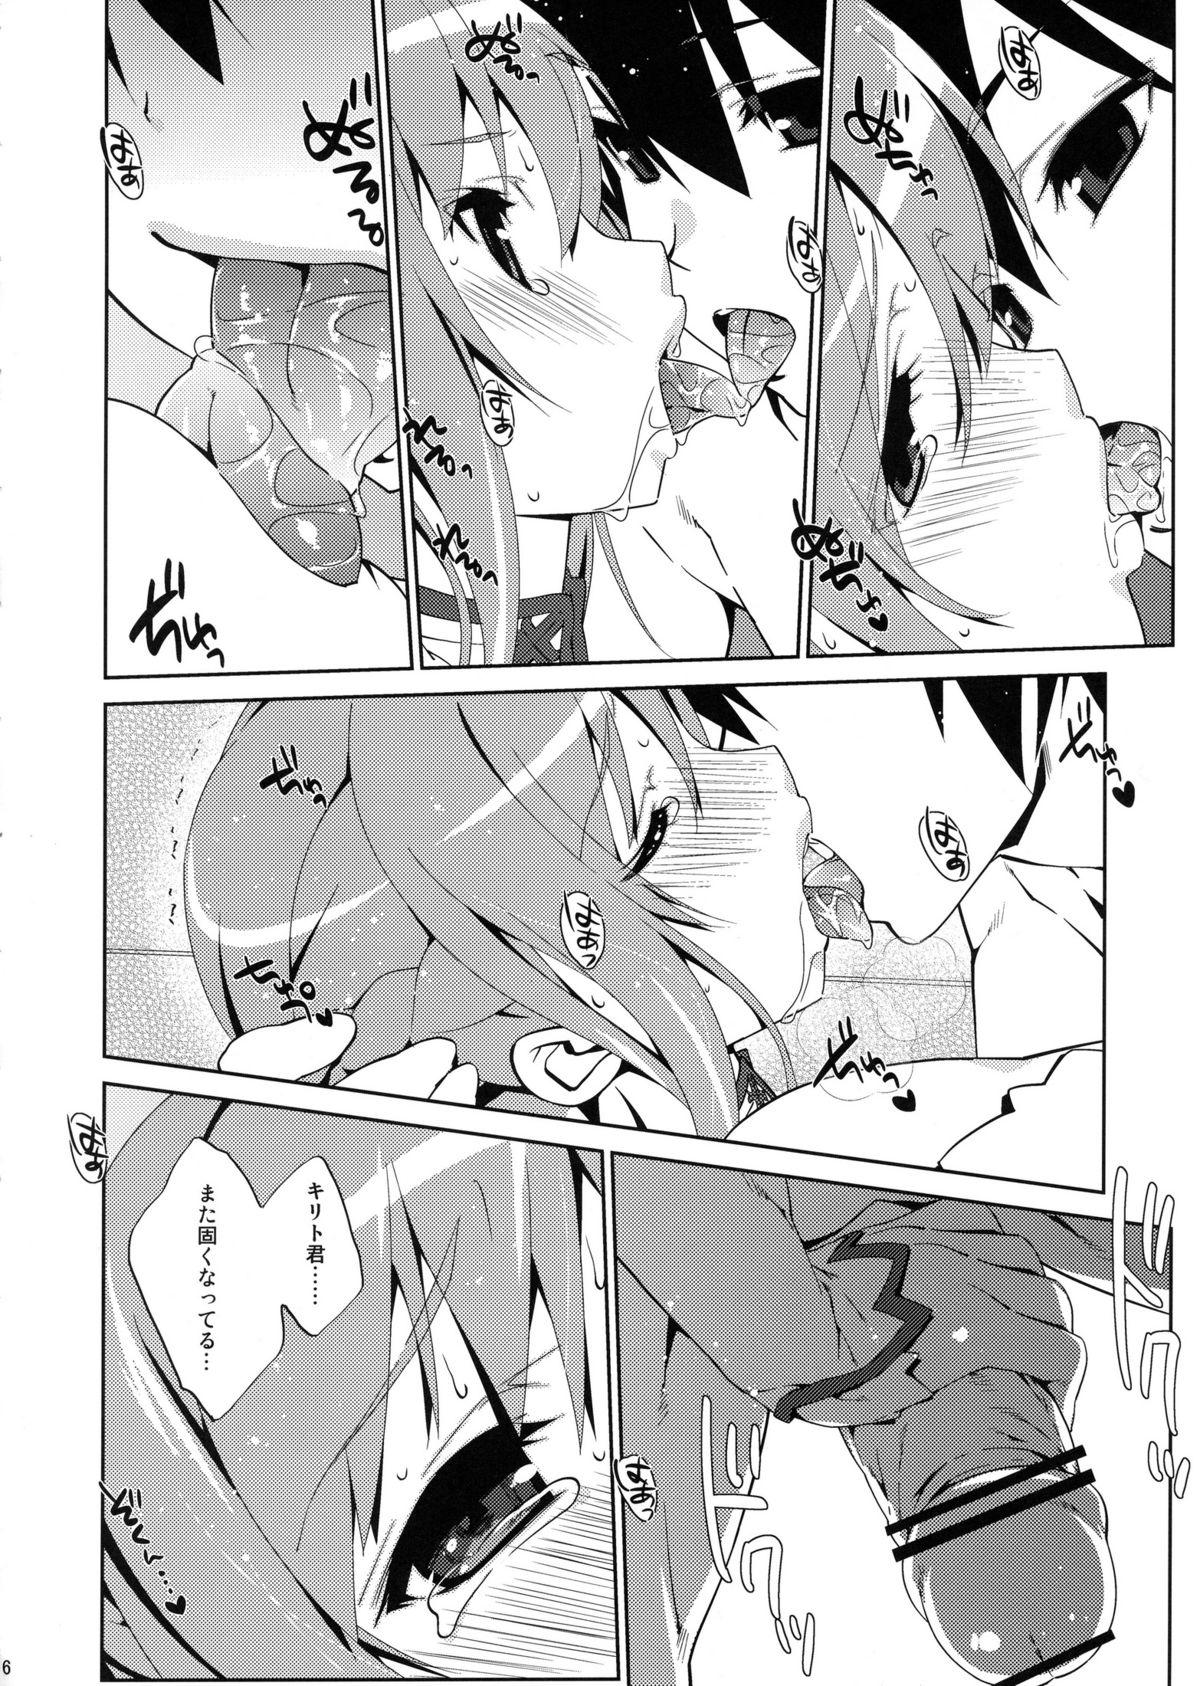 Good SPECIAL ASUNA ONLINE 2 - Sword art online Egypt - Page 4